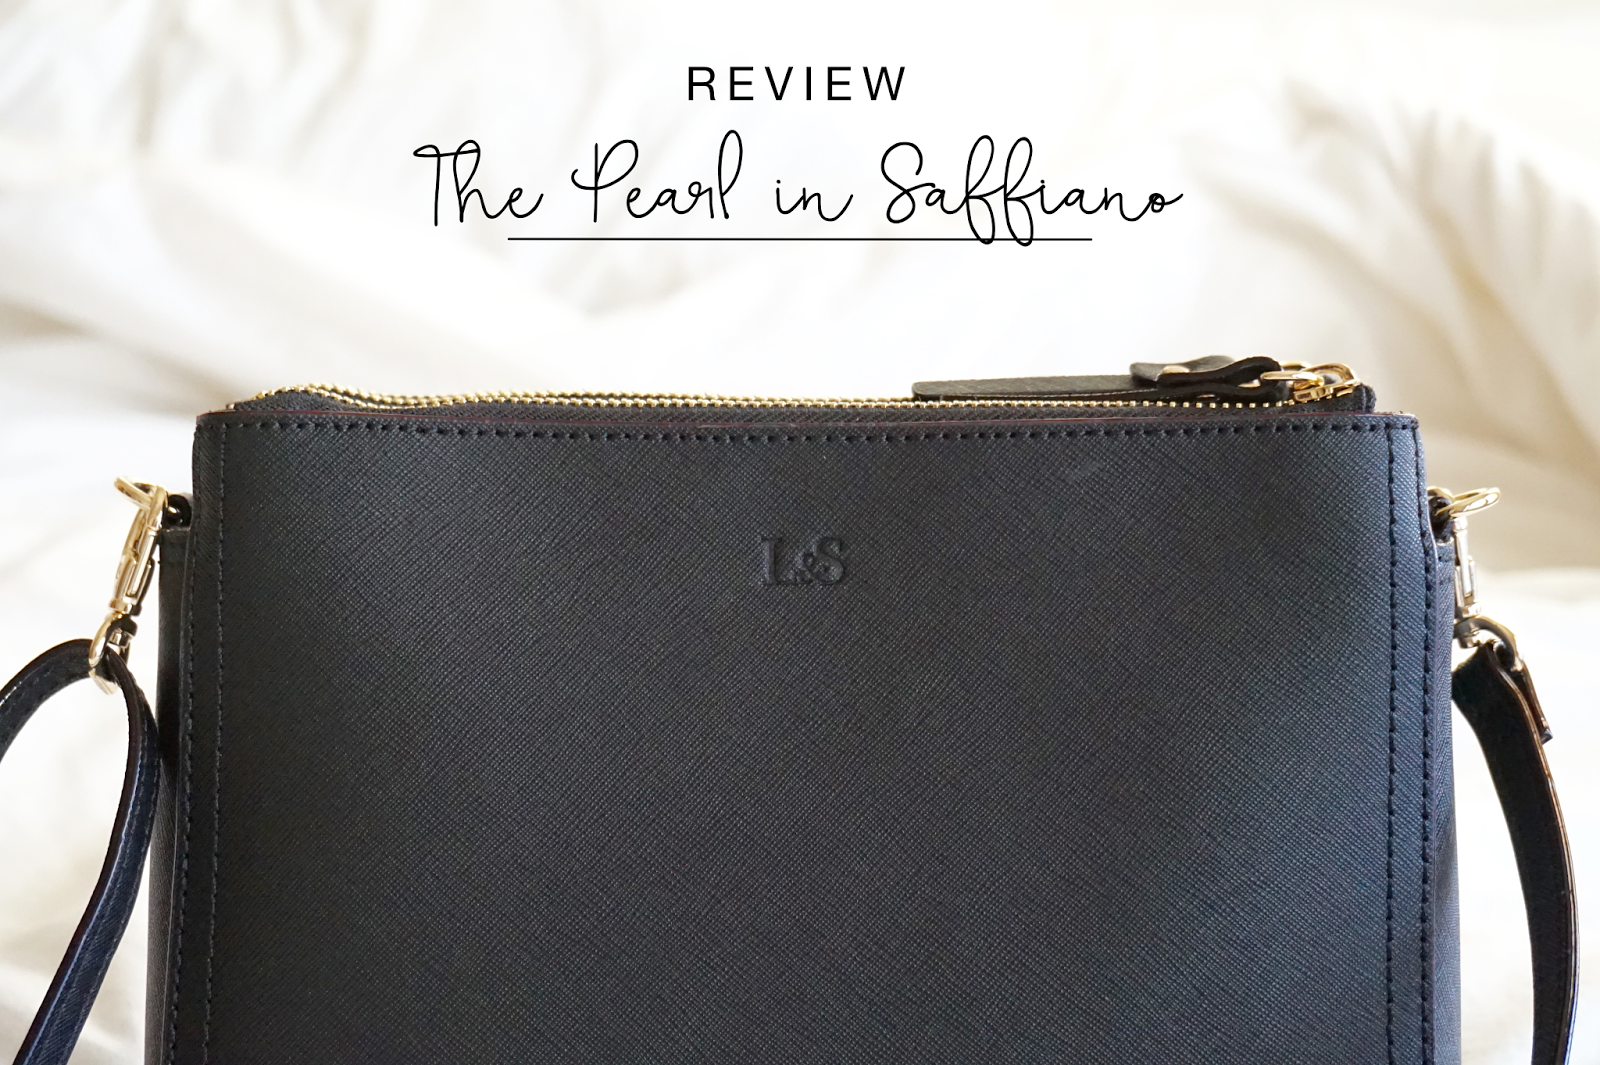 Lo & Sons The Pearl in Saffiano Review